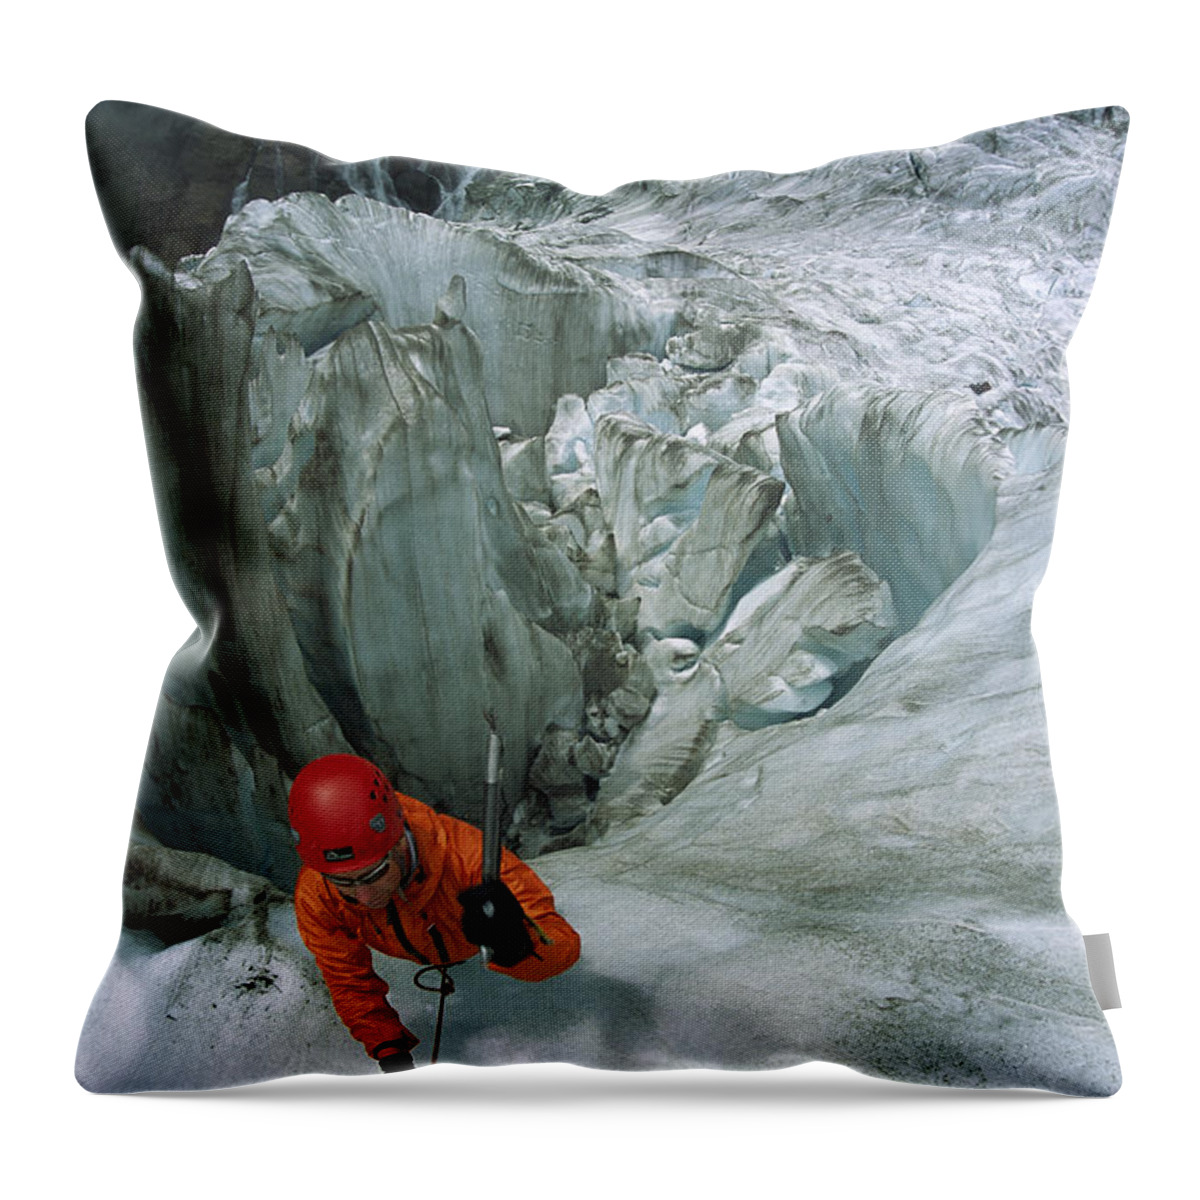 Hhh Throw Pillow featuring the photograph Ice Climber On Steep Ice In Fox Glacier by Colin Monteath